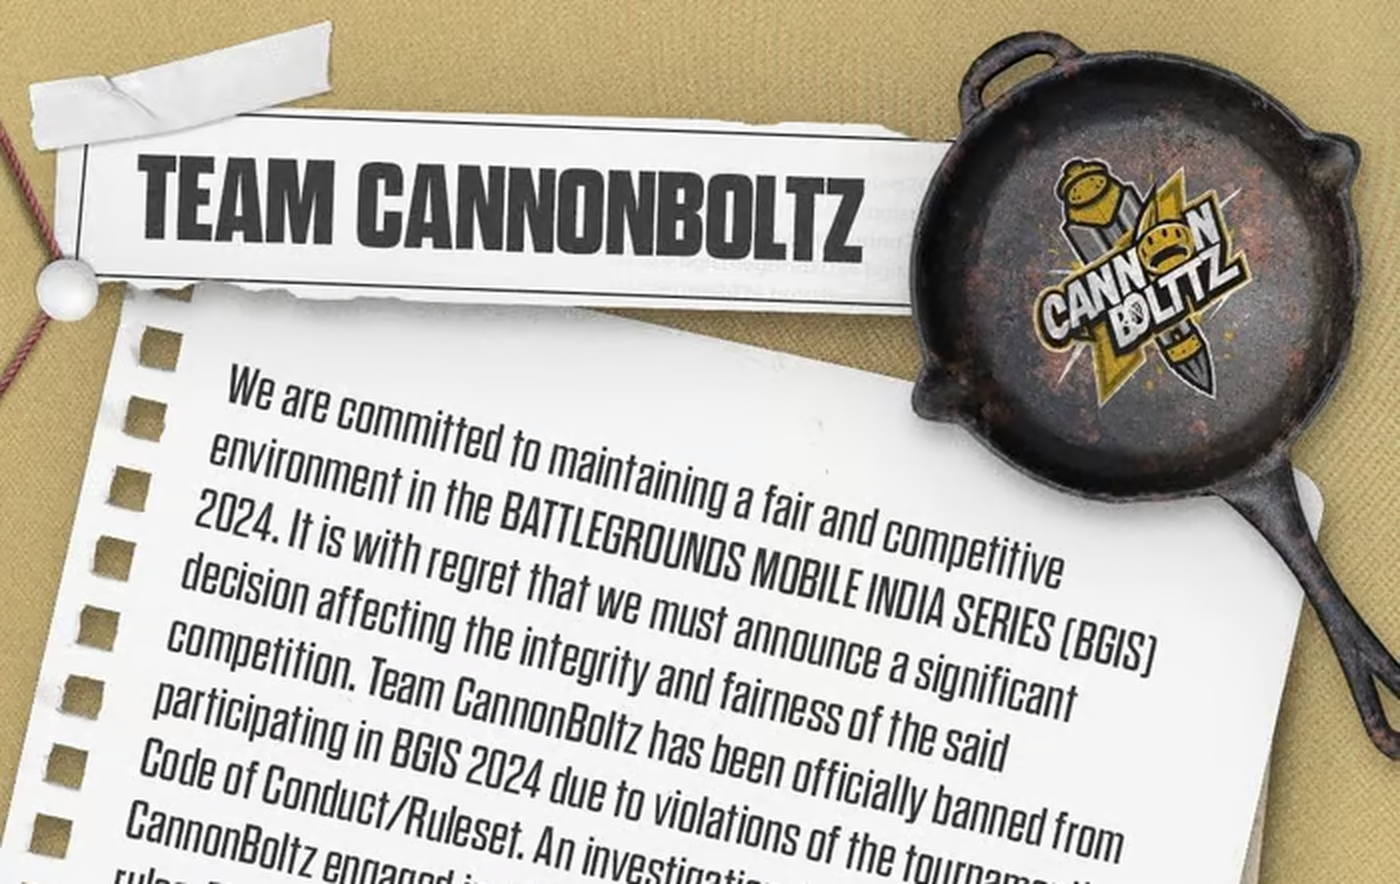 CannonBoltz Banned from BGIS 2024 The Grind for Rule Violation